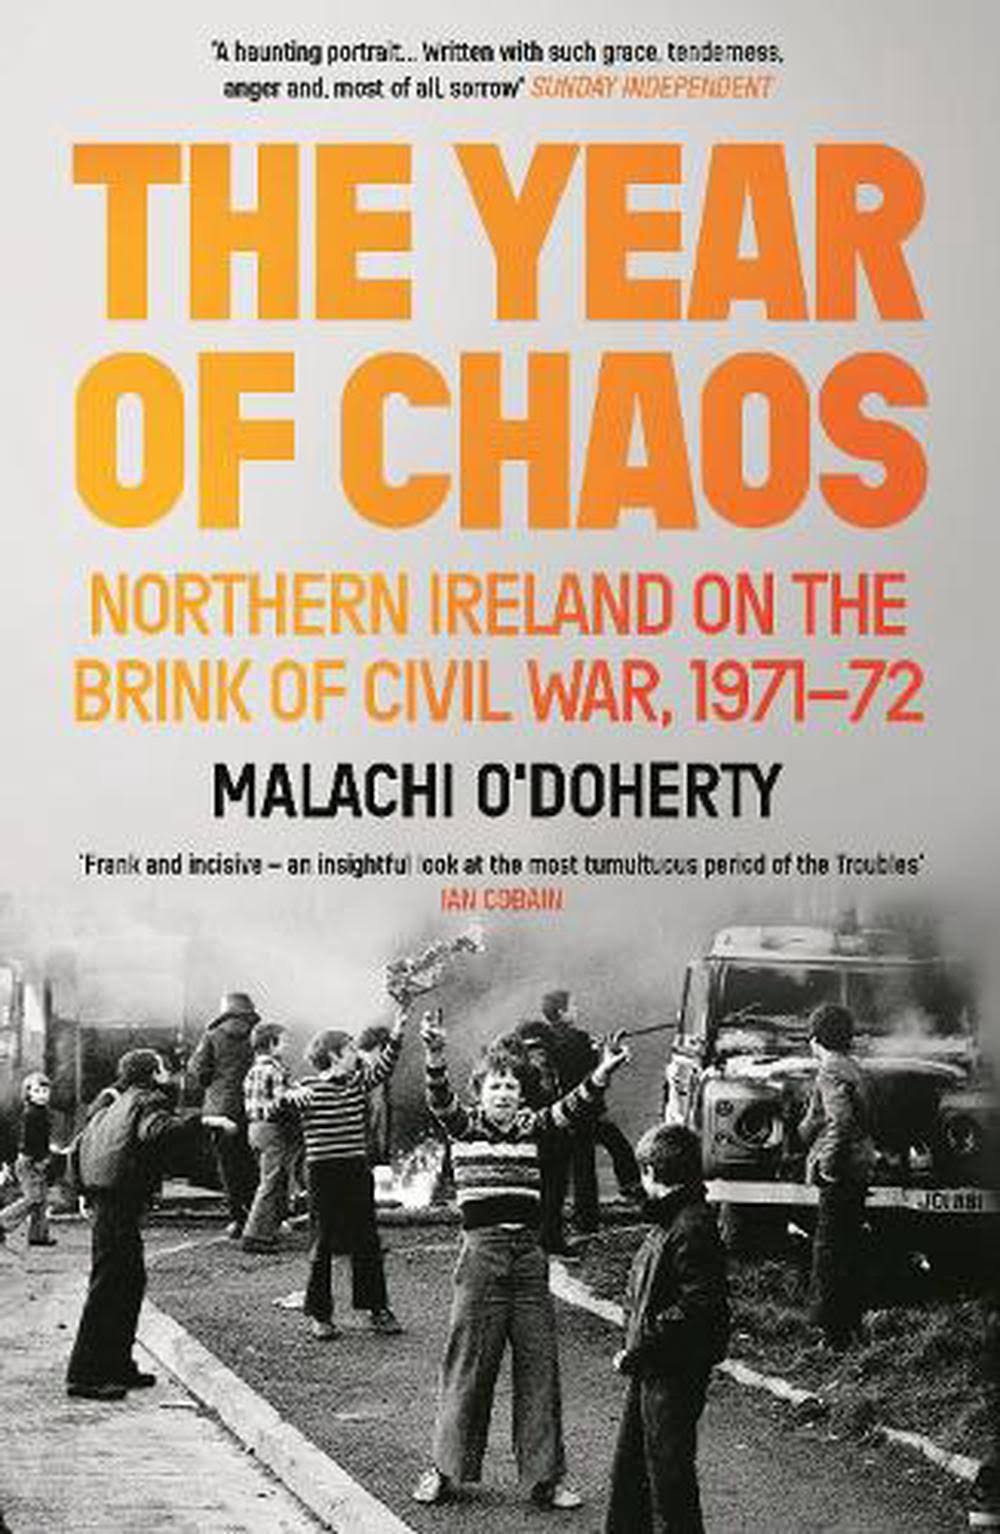 The Year of Chaos: Northern Ireland on the Brink of Civil War, 1971-72 [Book]